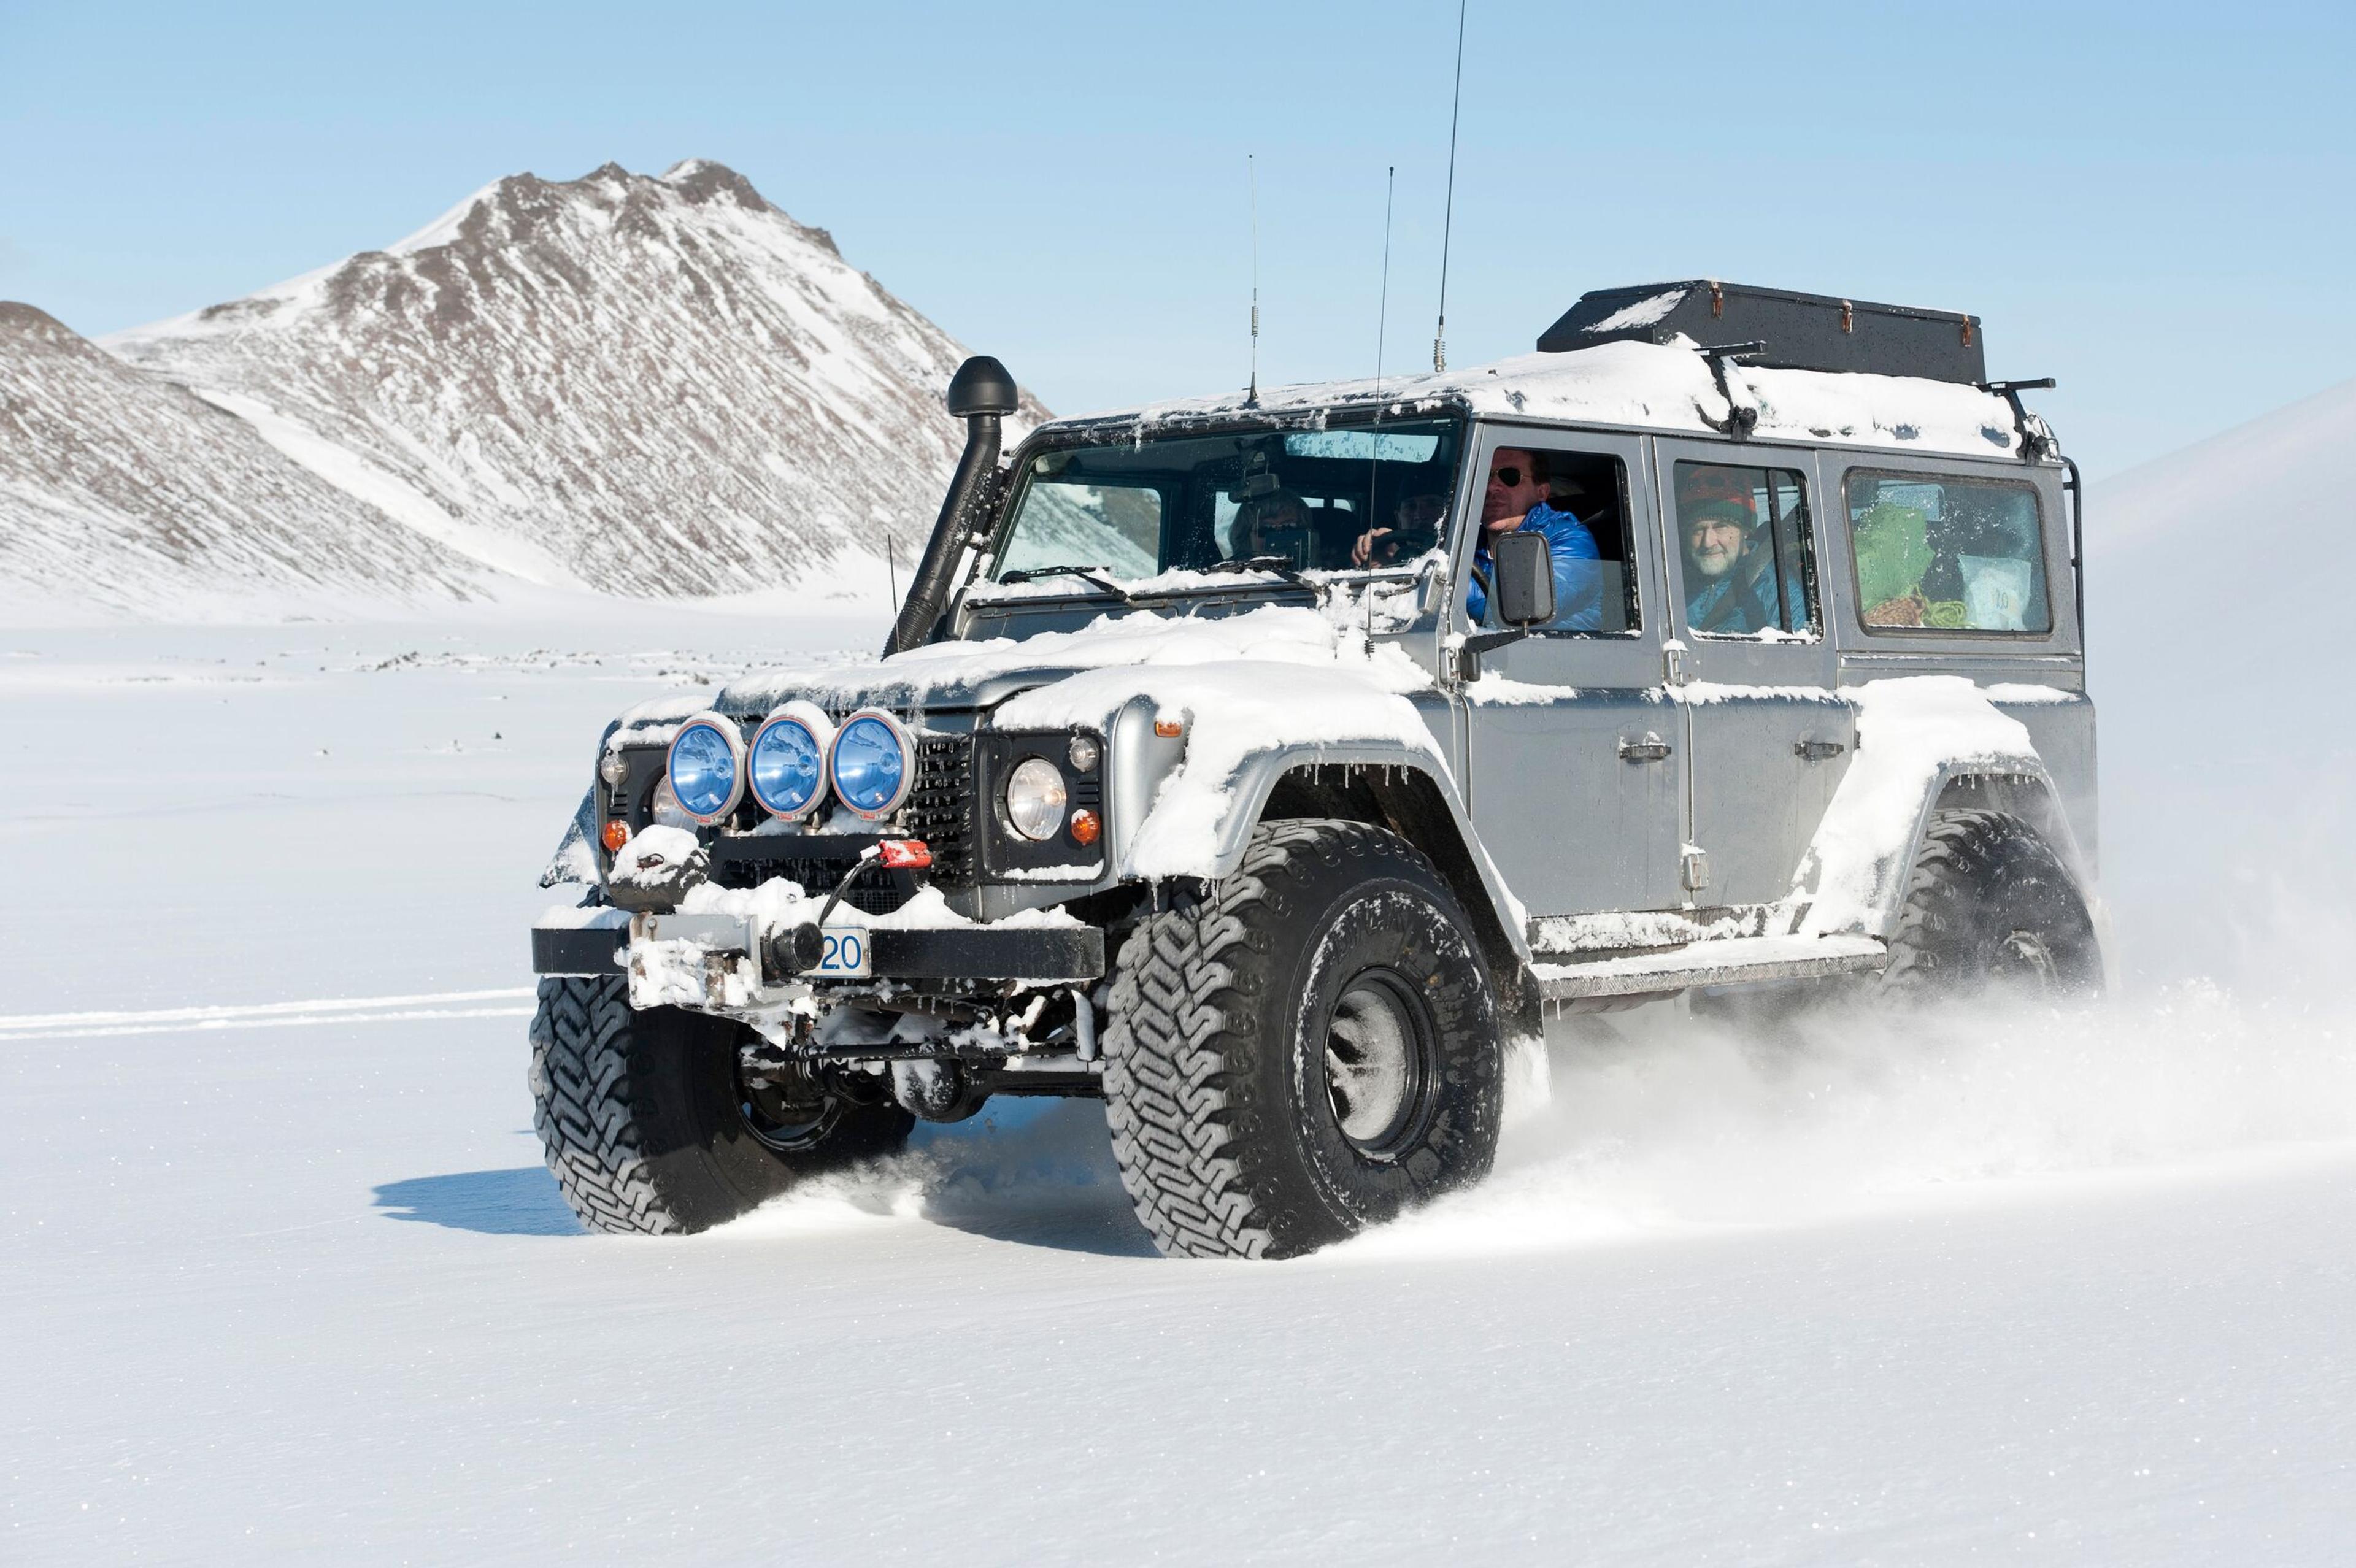 A large Jeep crossing in a snowy field against a backdrop of sunlit snowy mountains.